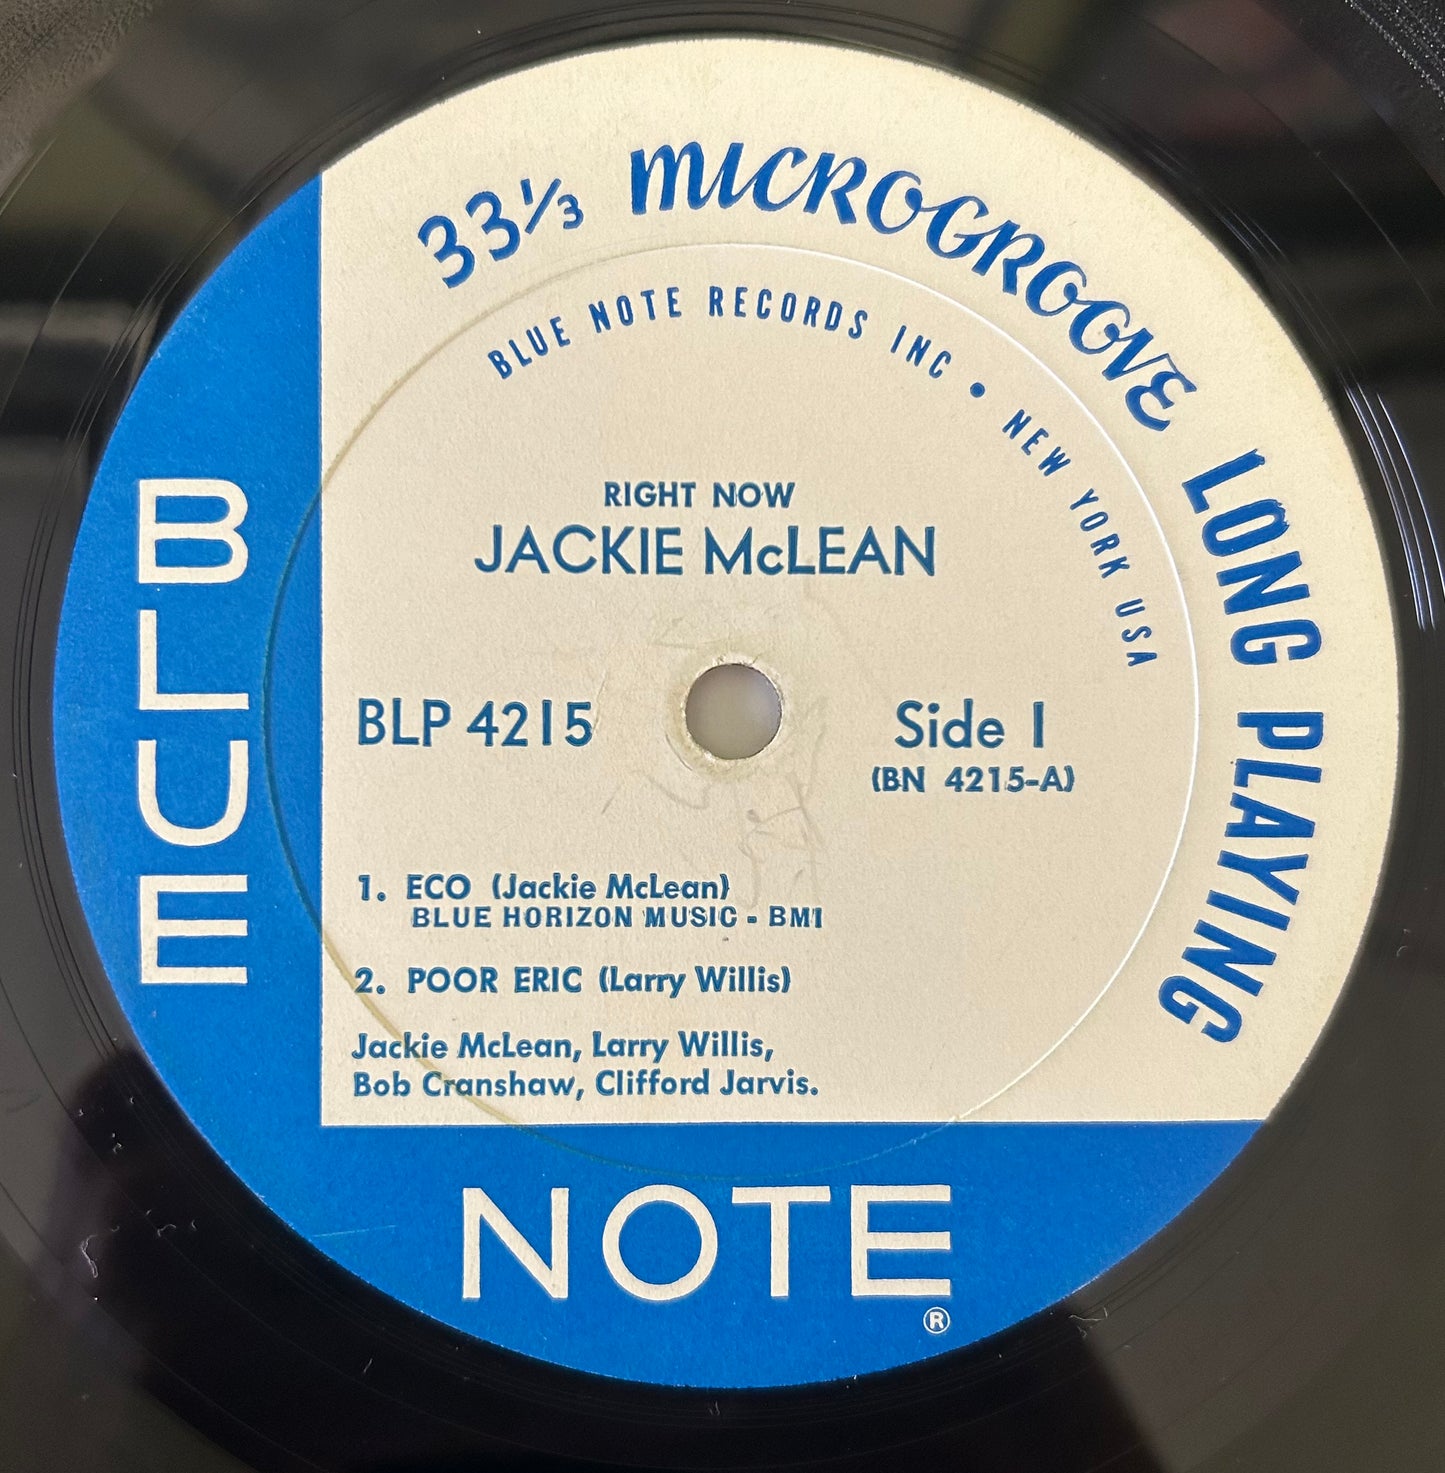 Jackie McLean - Right Now! 1st mono Press 1966 Blue Note